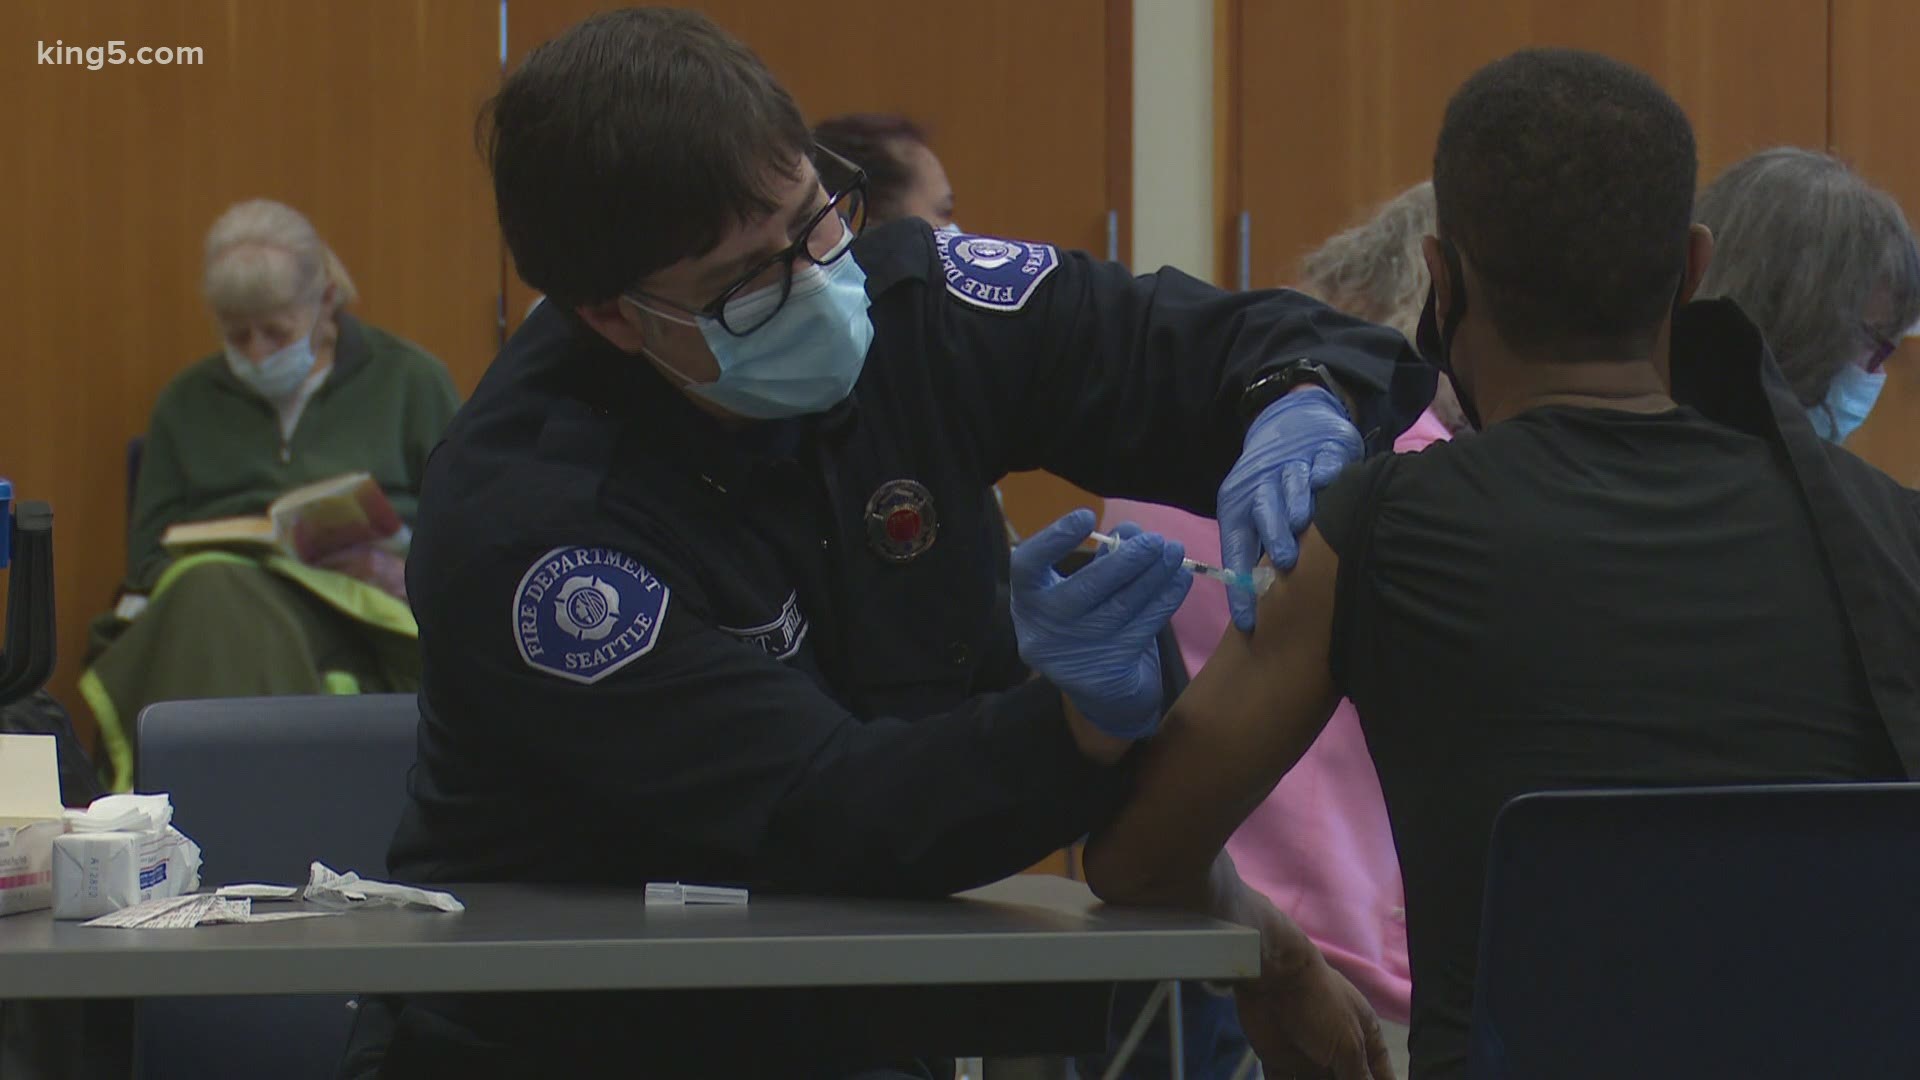 The City of Seattle gets 1,000 doses of the COVID-19 vaccine each week, meaning nearly half of the week’s allotment went to the pop-up clinic on Sunday.